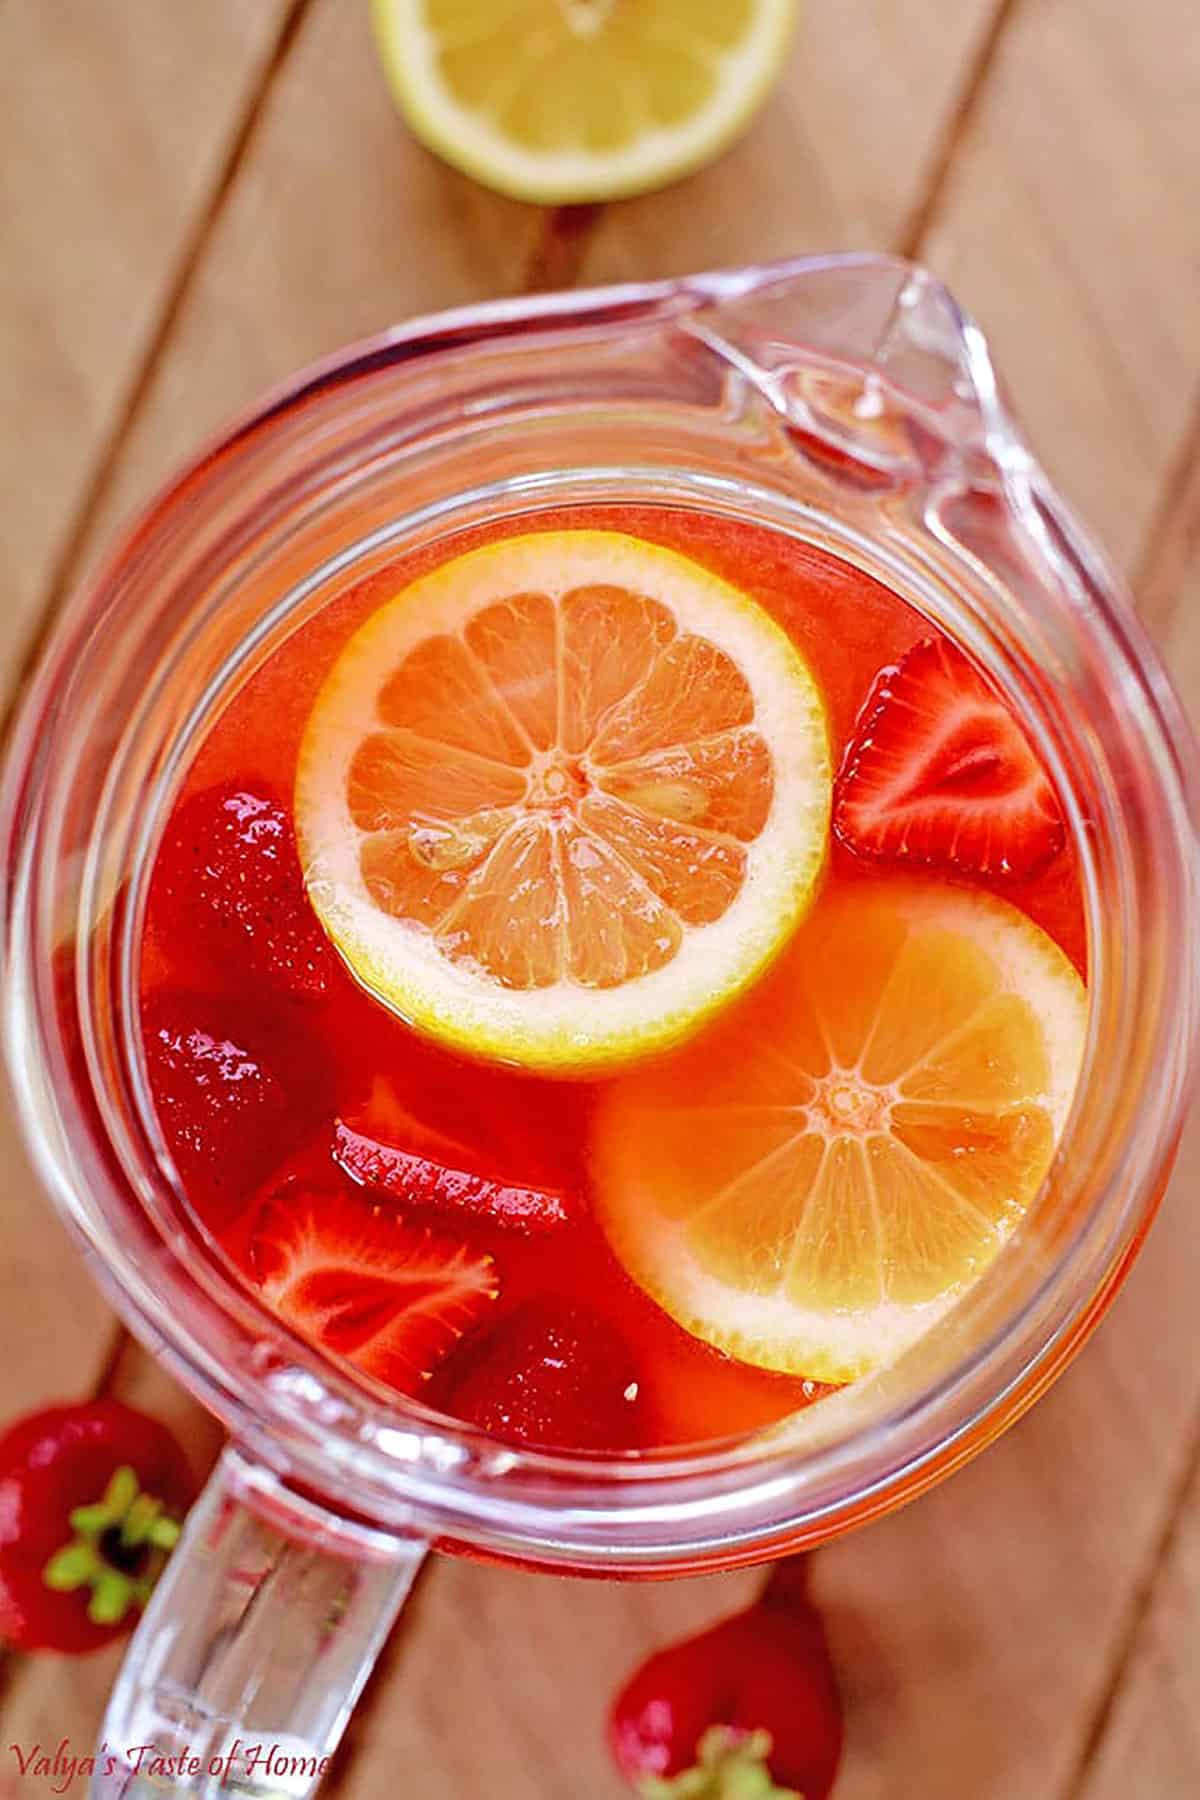 It’s made using freshly squeezed lemon juice and blended strawberries. It tastes a hundred times better than any powdered drink, crystal light, or even tang. Once you try it, you won’t be able to stop making it at home.